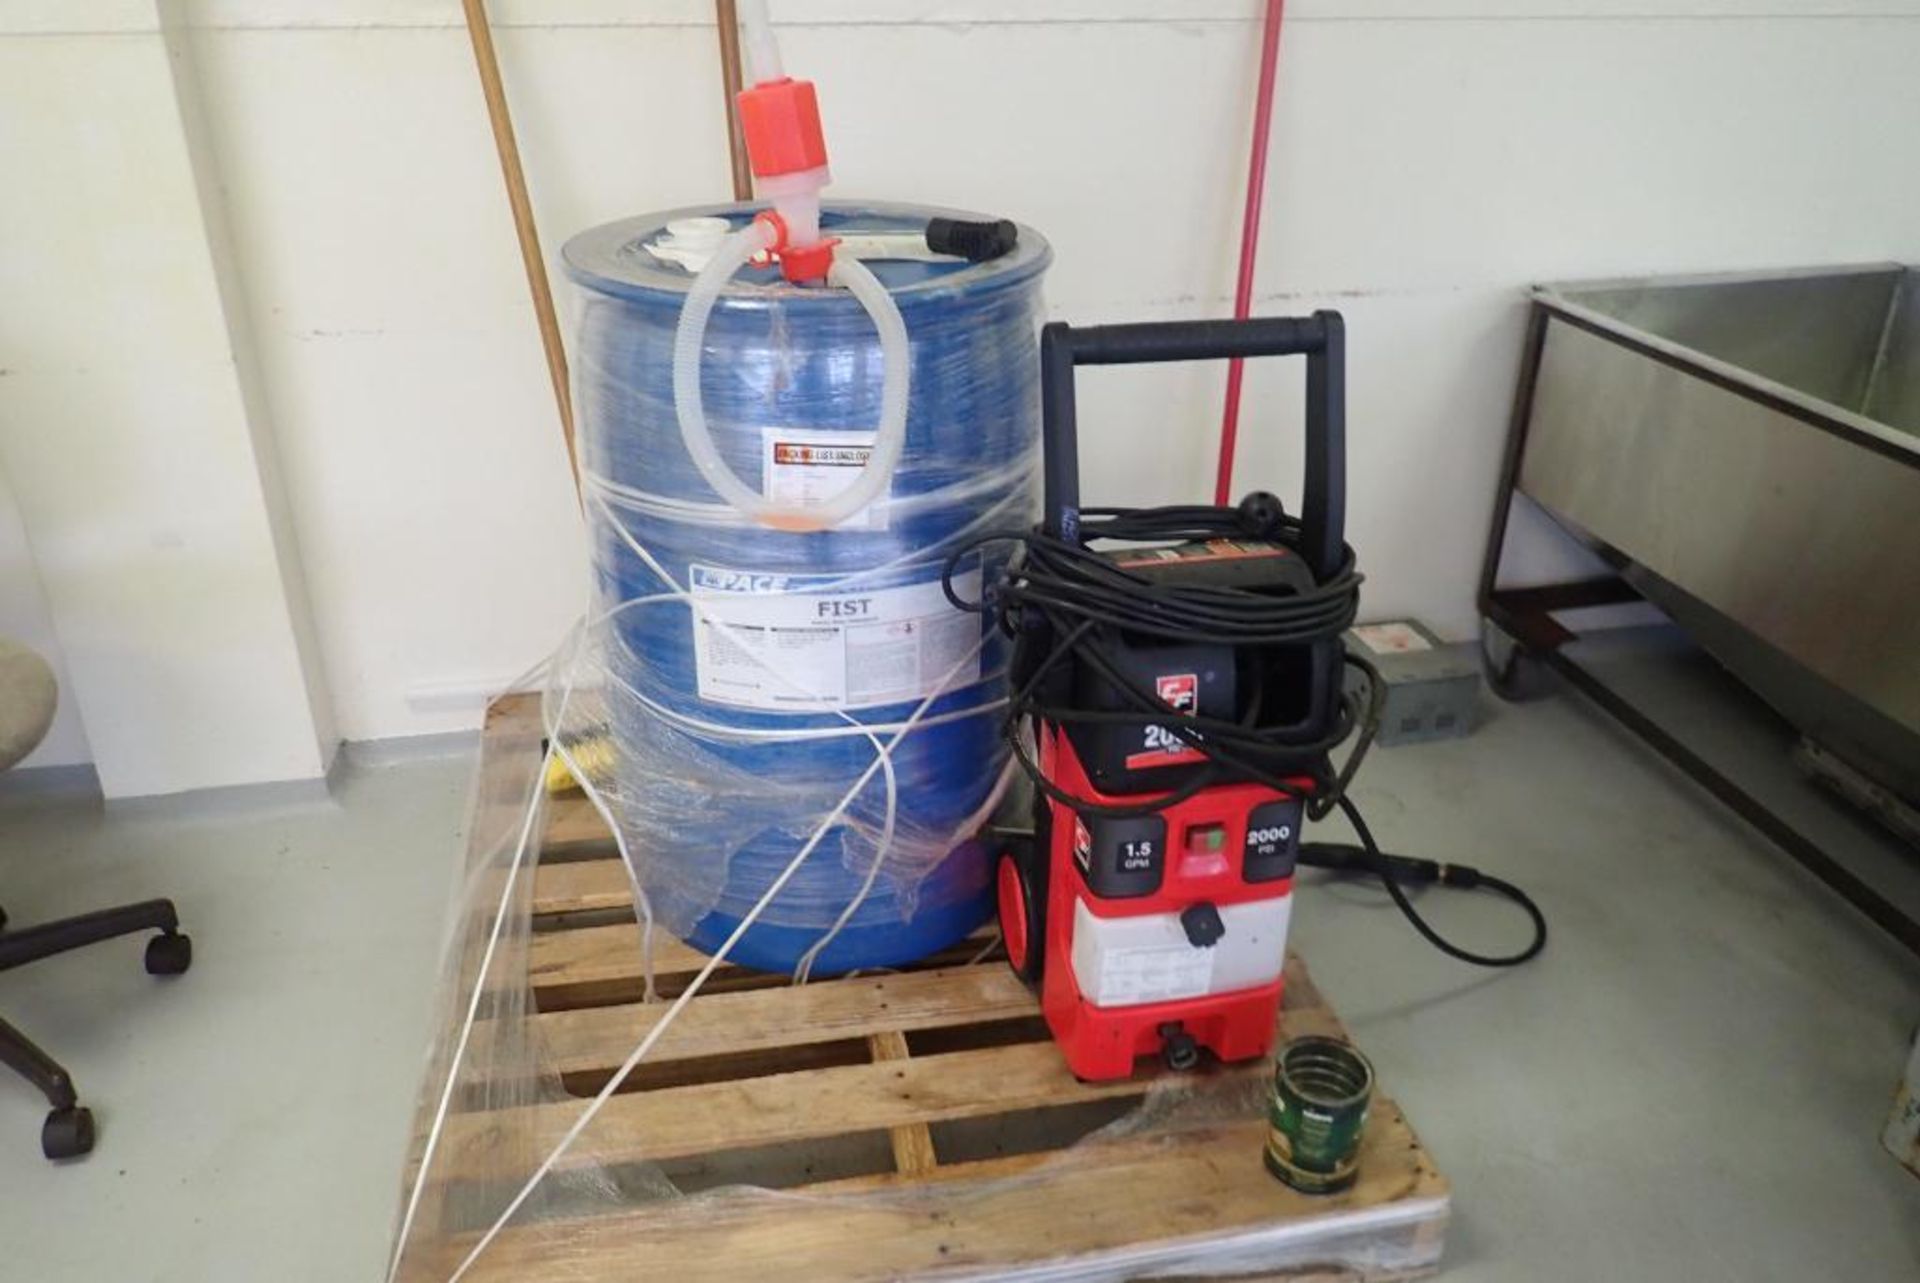 Lot of CleanForce Electric Pressure Washer and Fist Heavy Duty Detergent.